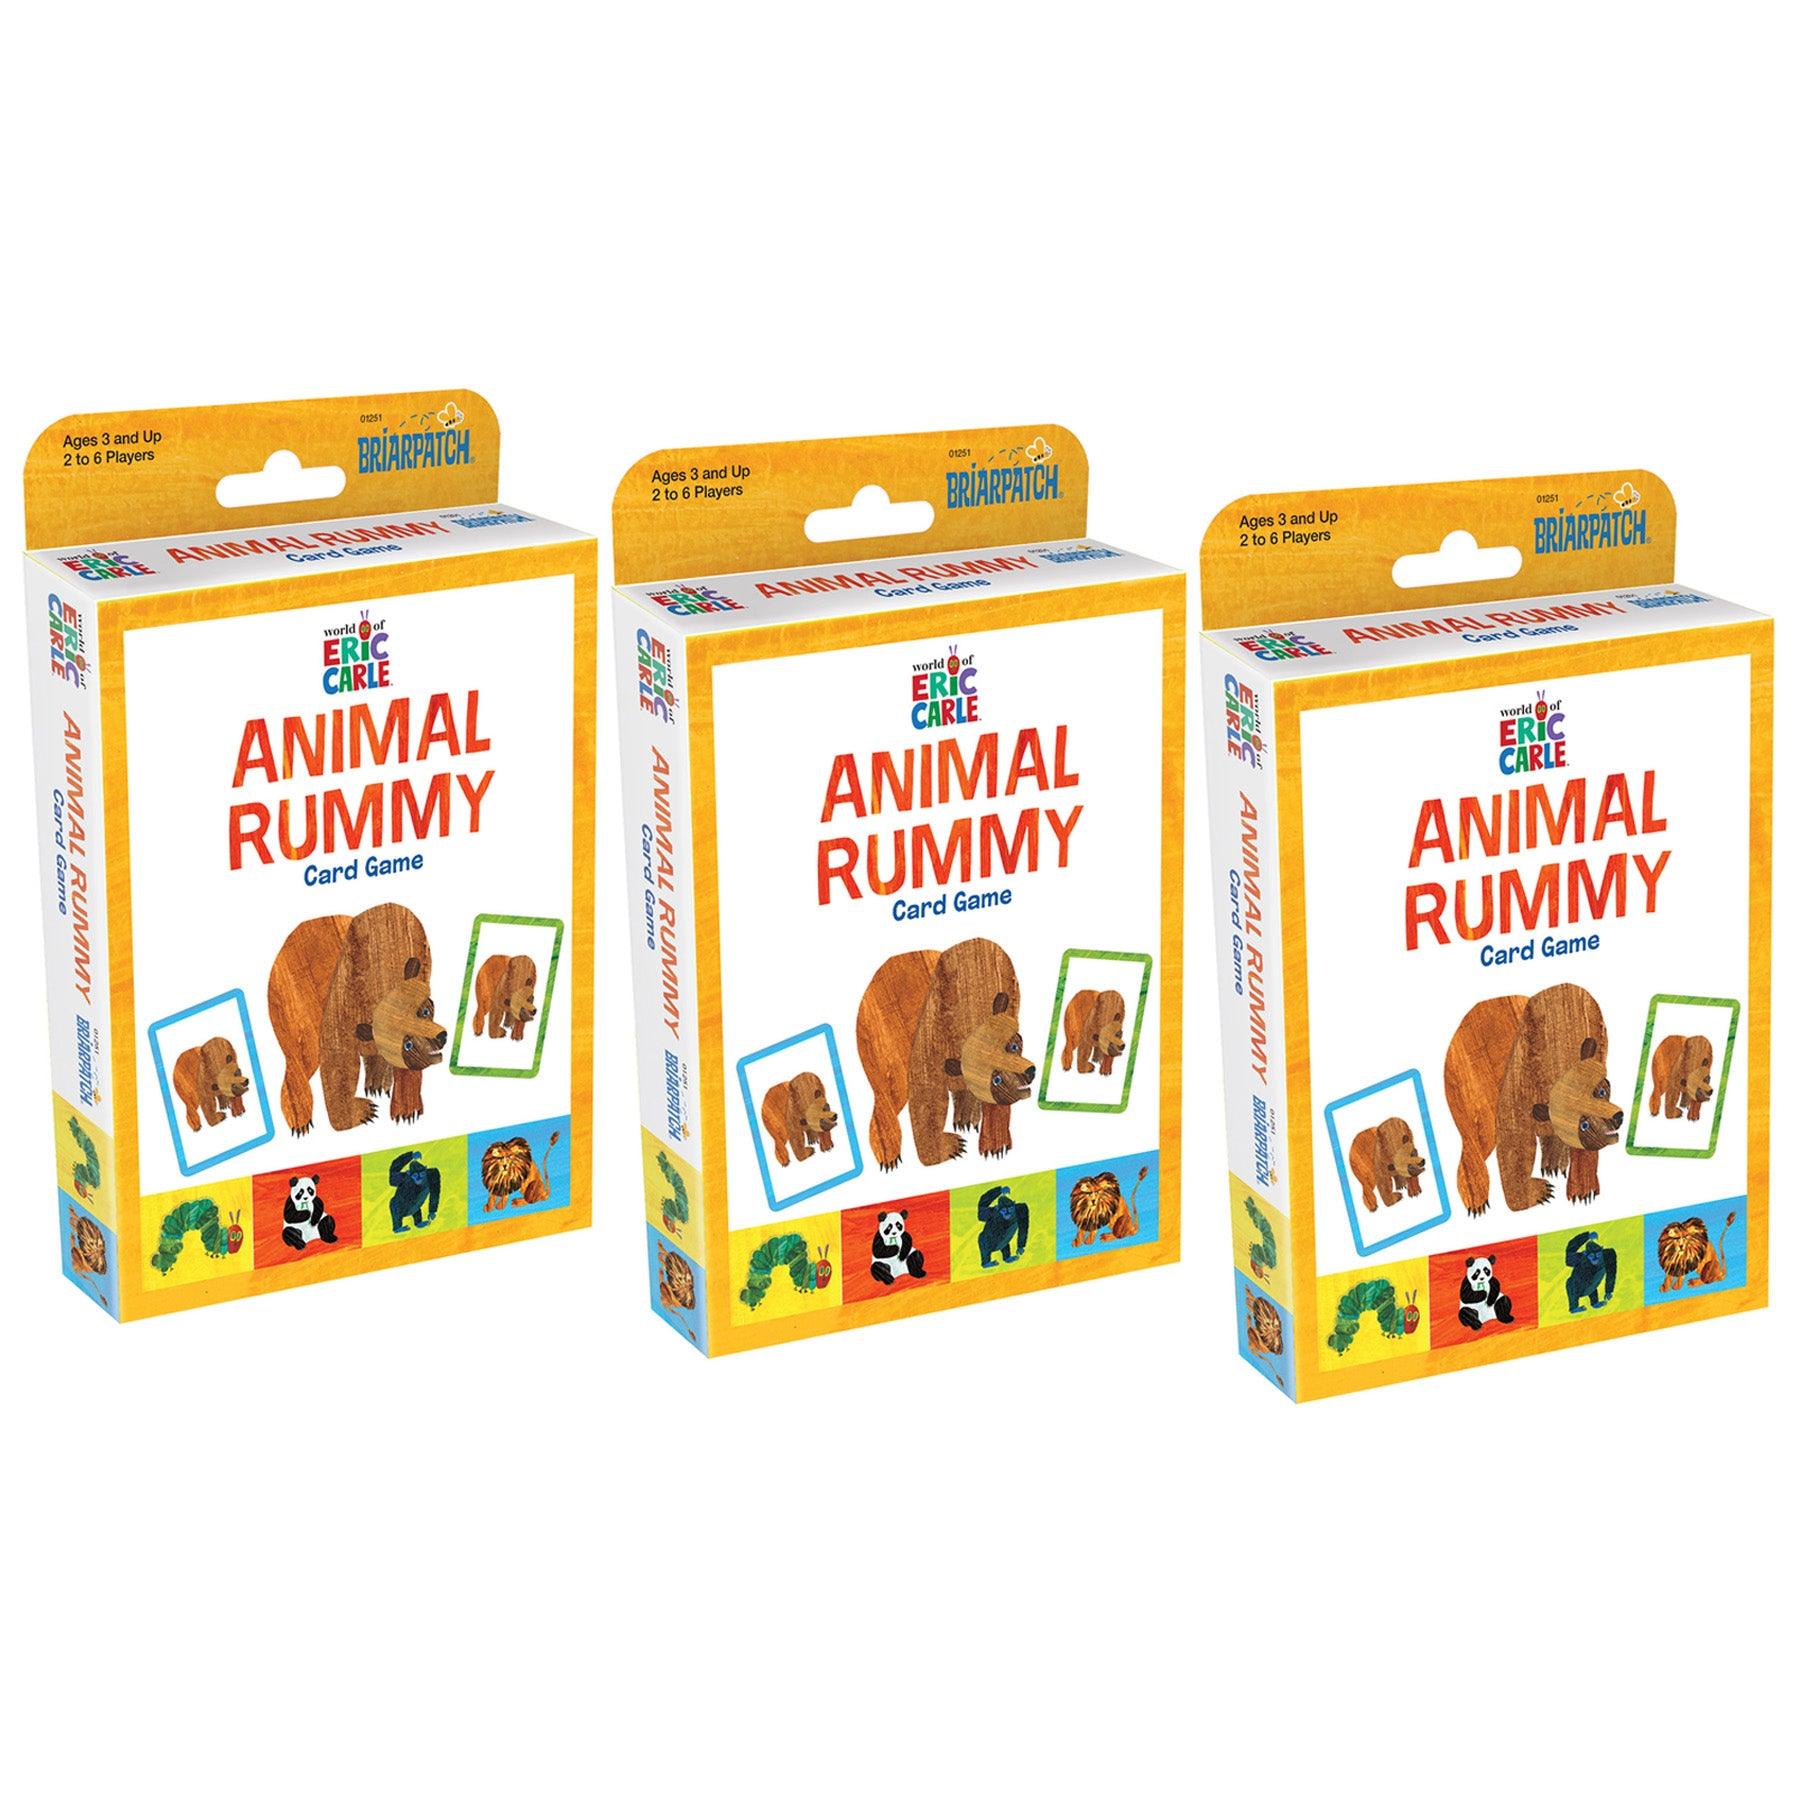 The World of Eric Carle™ Animal Rummy Card Game, Pack of 3 - Loomini